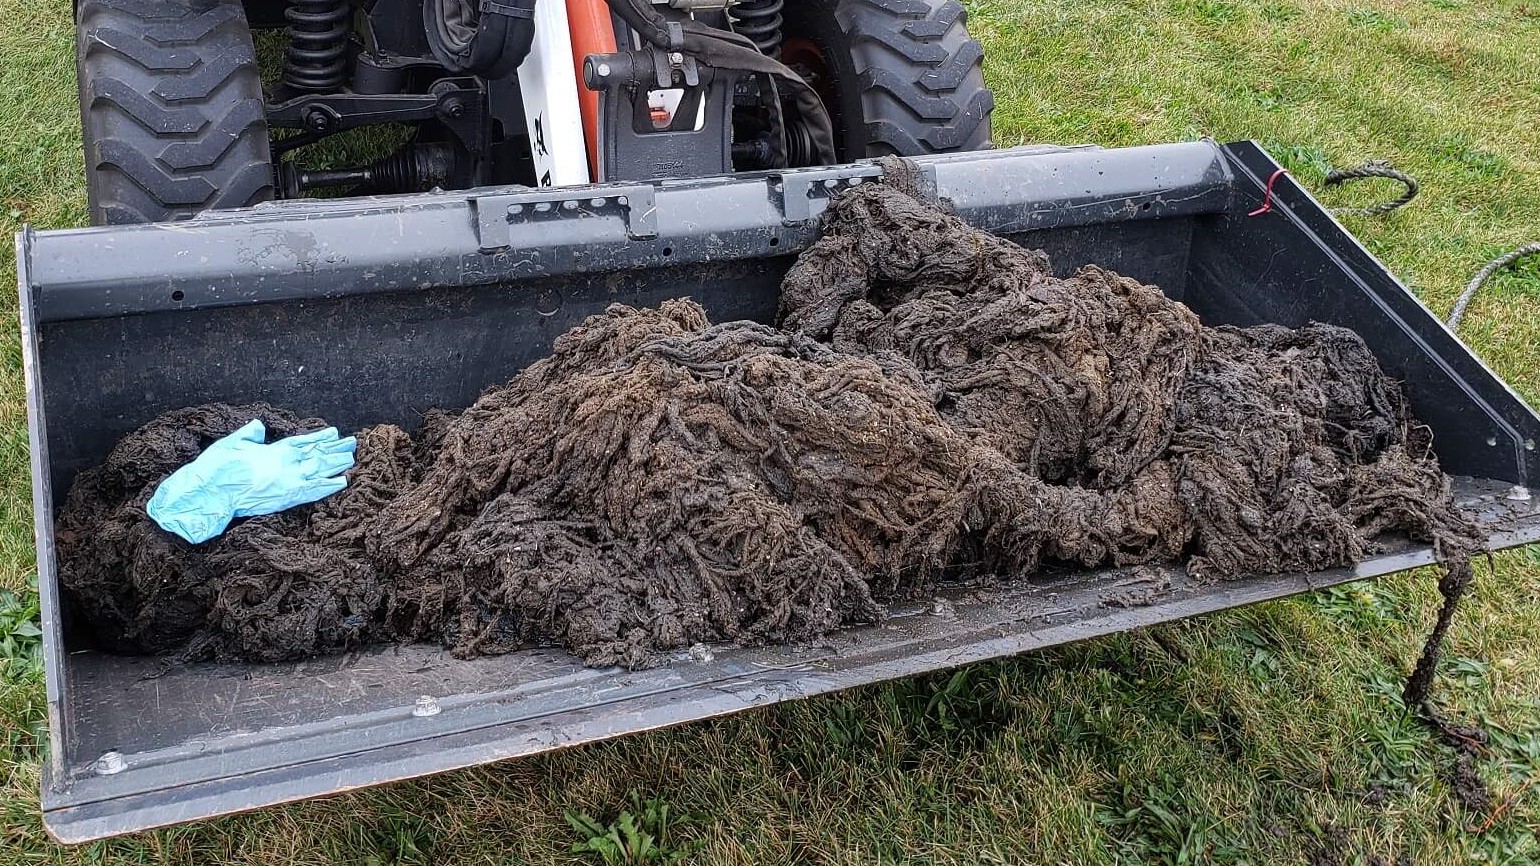 A mass of dirty rags and unflushable wipes in a front loader extracted from Grit Basin 1.